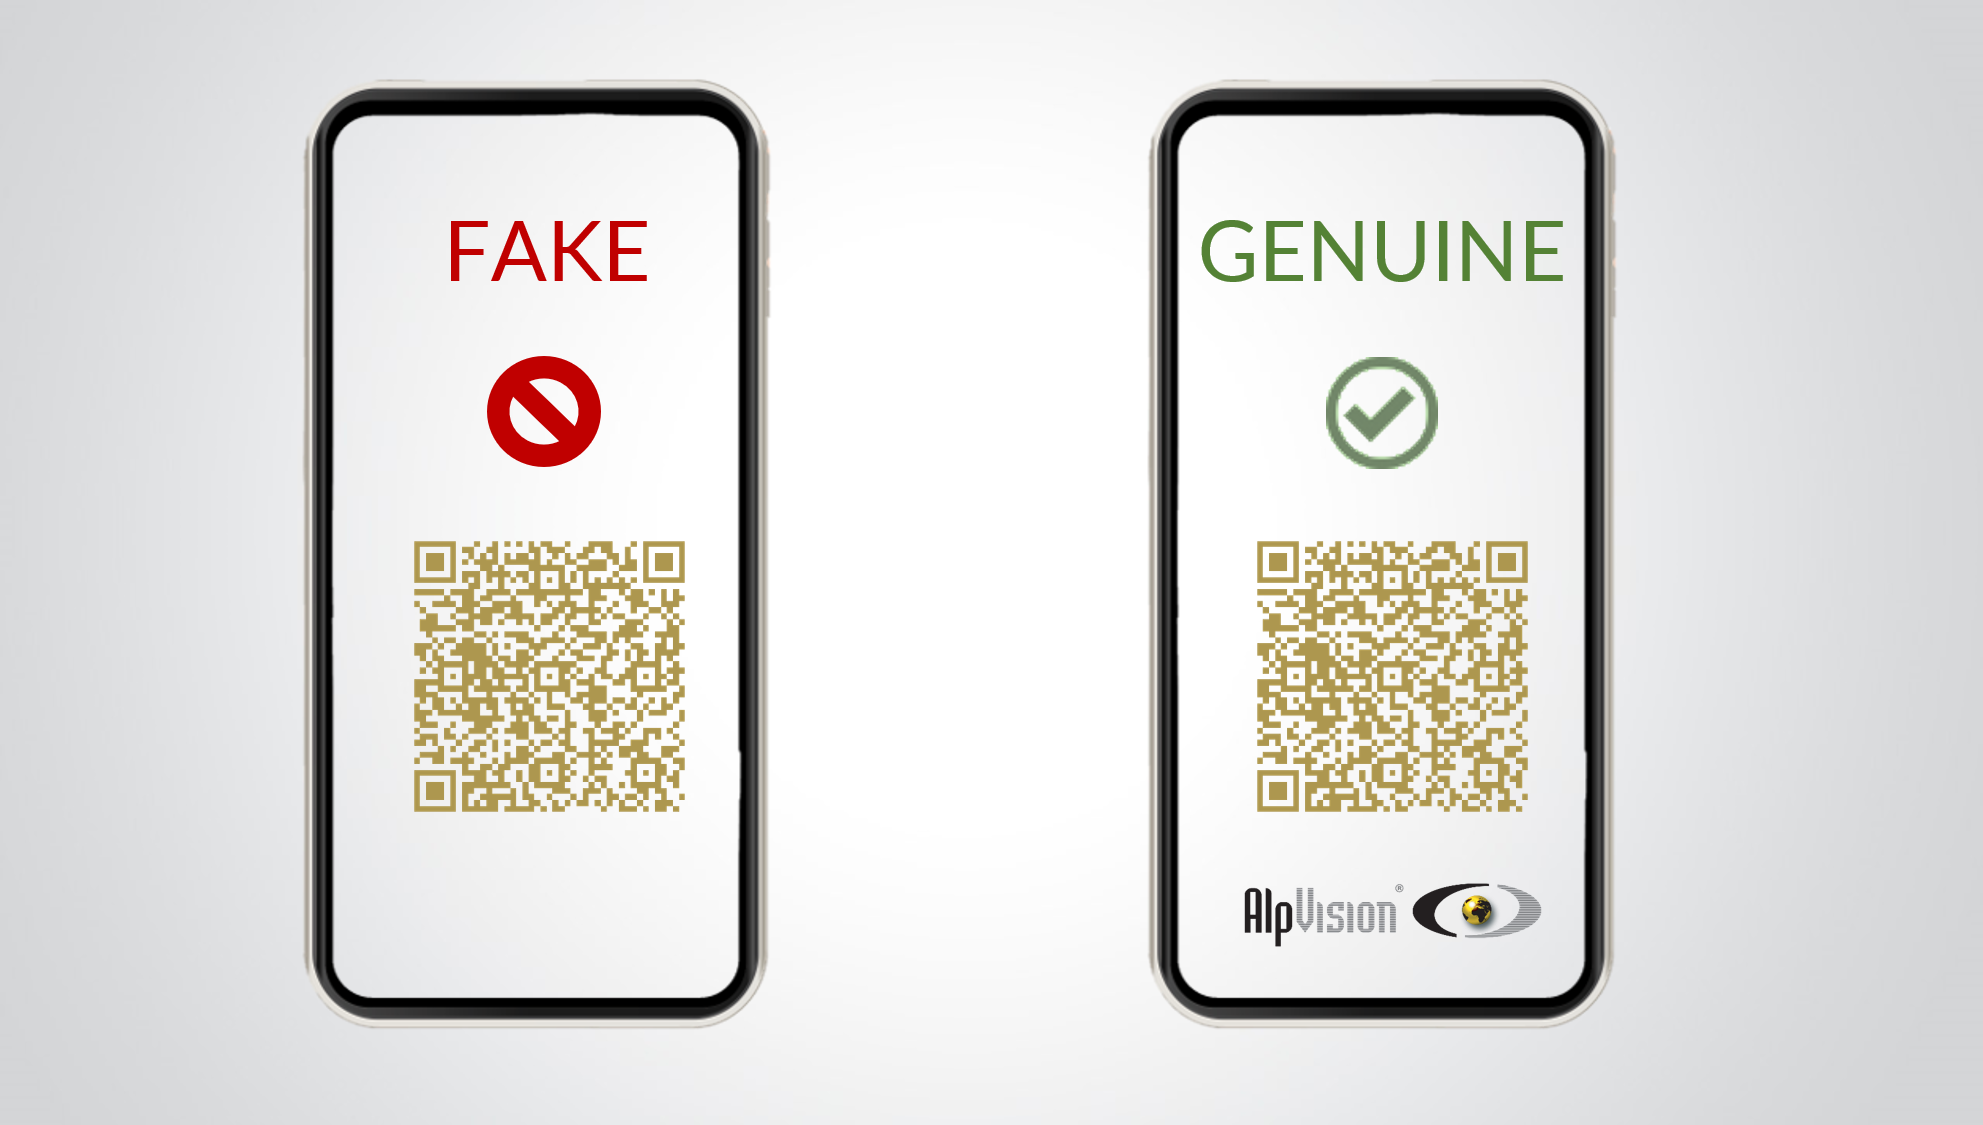 Can QR codes be counterfeited?